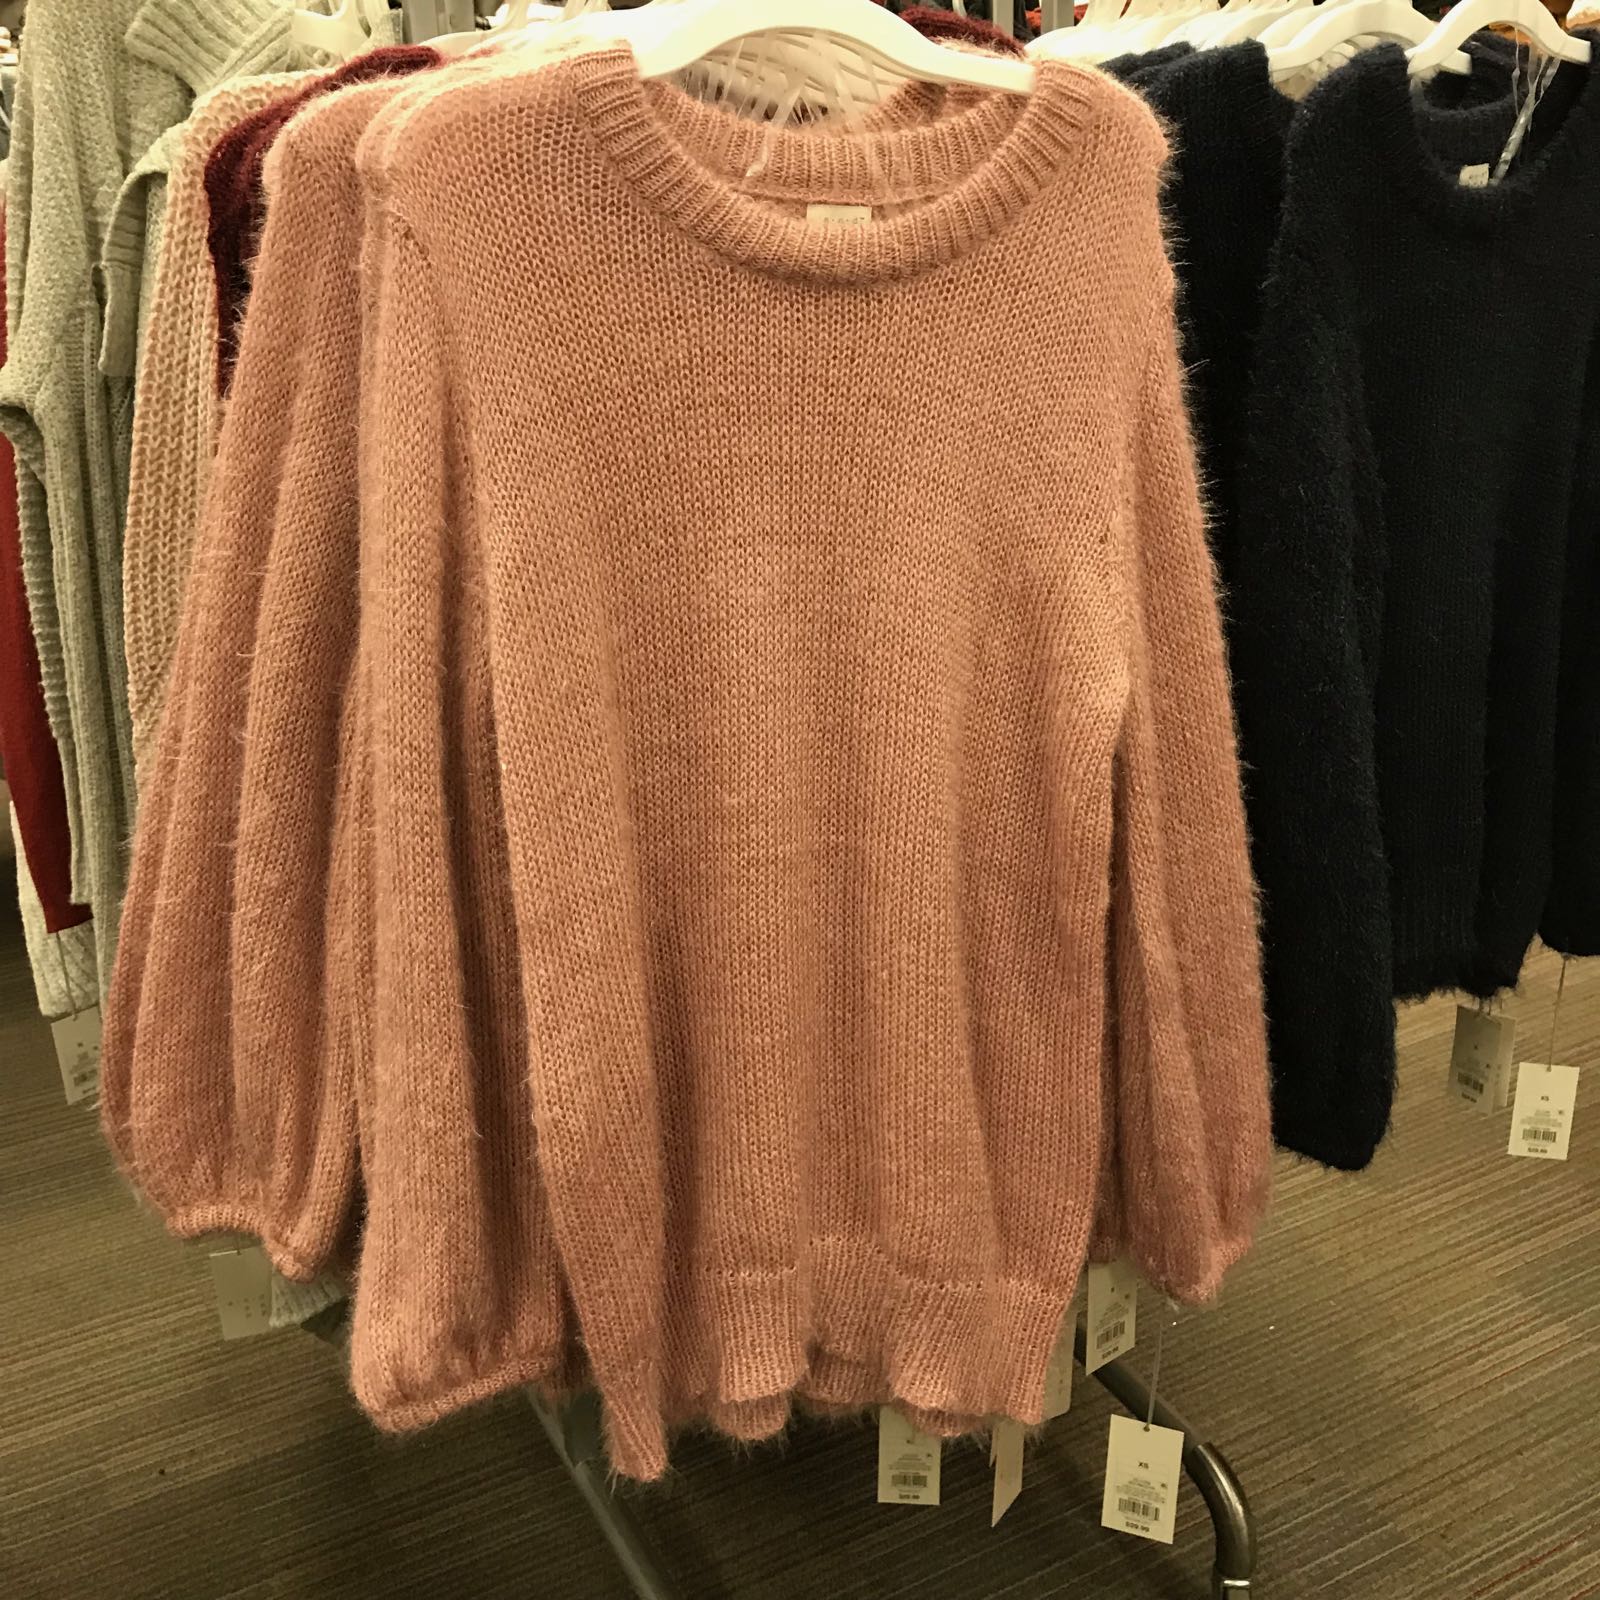 Need this for fall! At Target